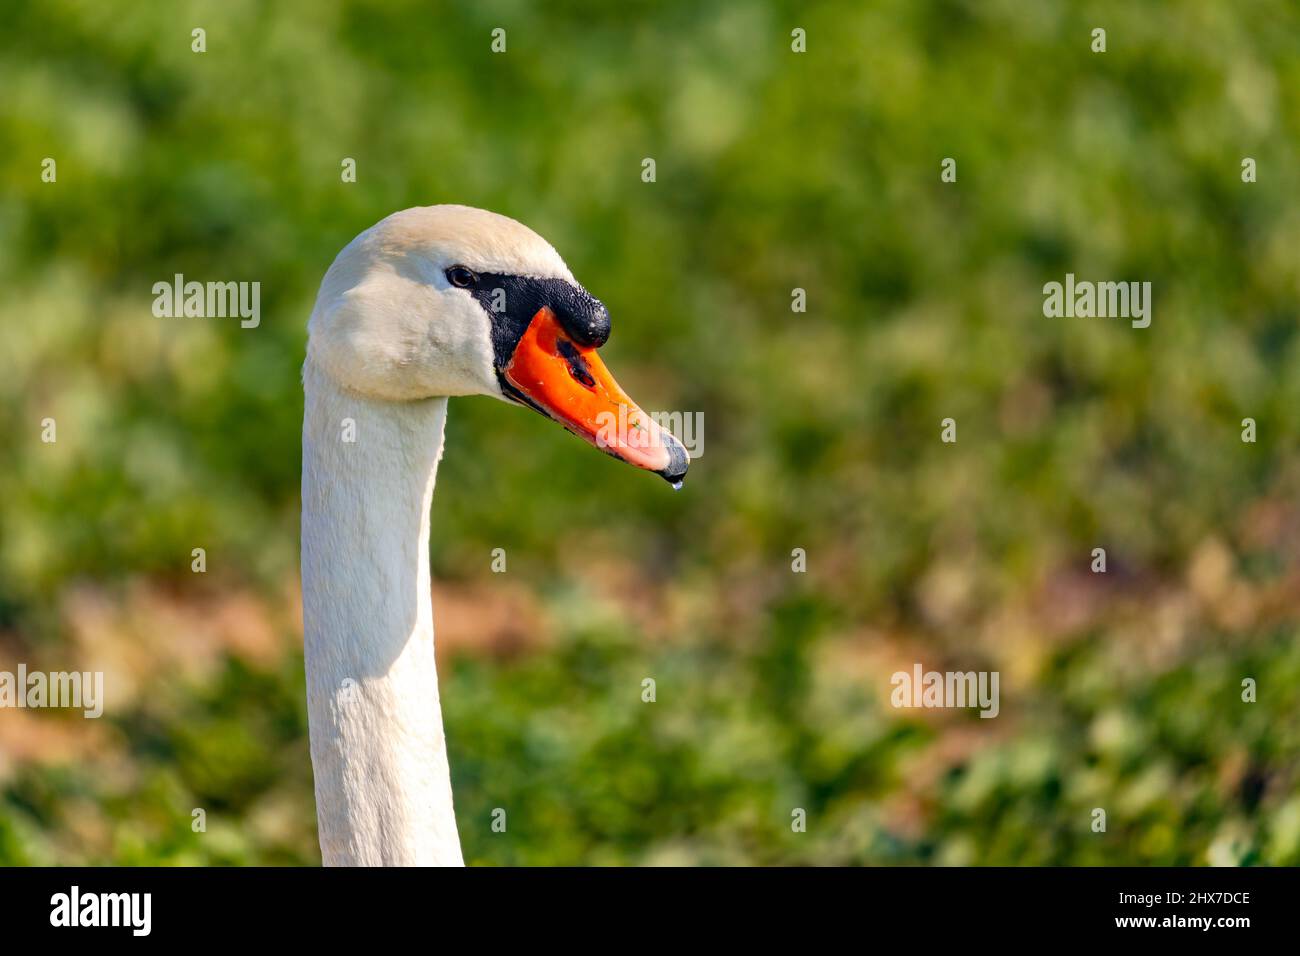 Close up of the neck and head of a mute swan in a green sunny field in winter Stock Photo